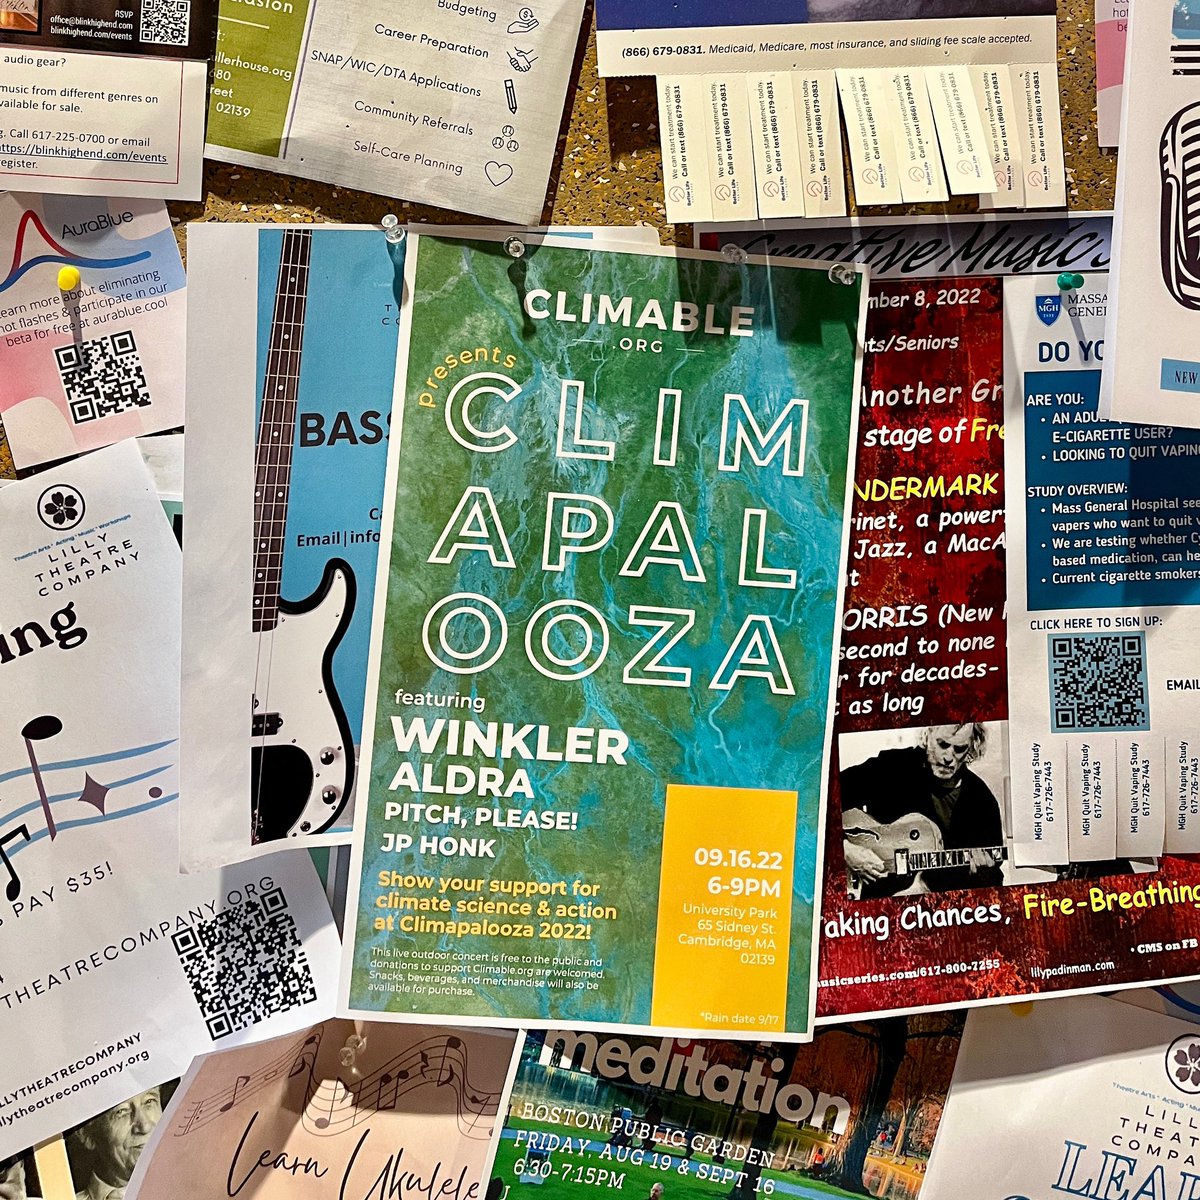 #CLIMAPALOOZA is in 5 DAYS! Have you seen our flyers in your favorite businesses around Central Square? 

Set a reminder for Fri, Sept. 16 at 6-9 PM at University Park Commons, Cambridge. You won’t want to miss it! 🌎🎶🌼